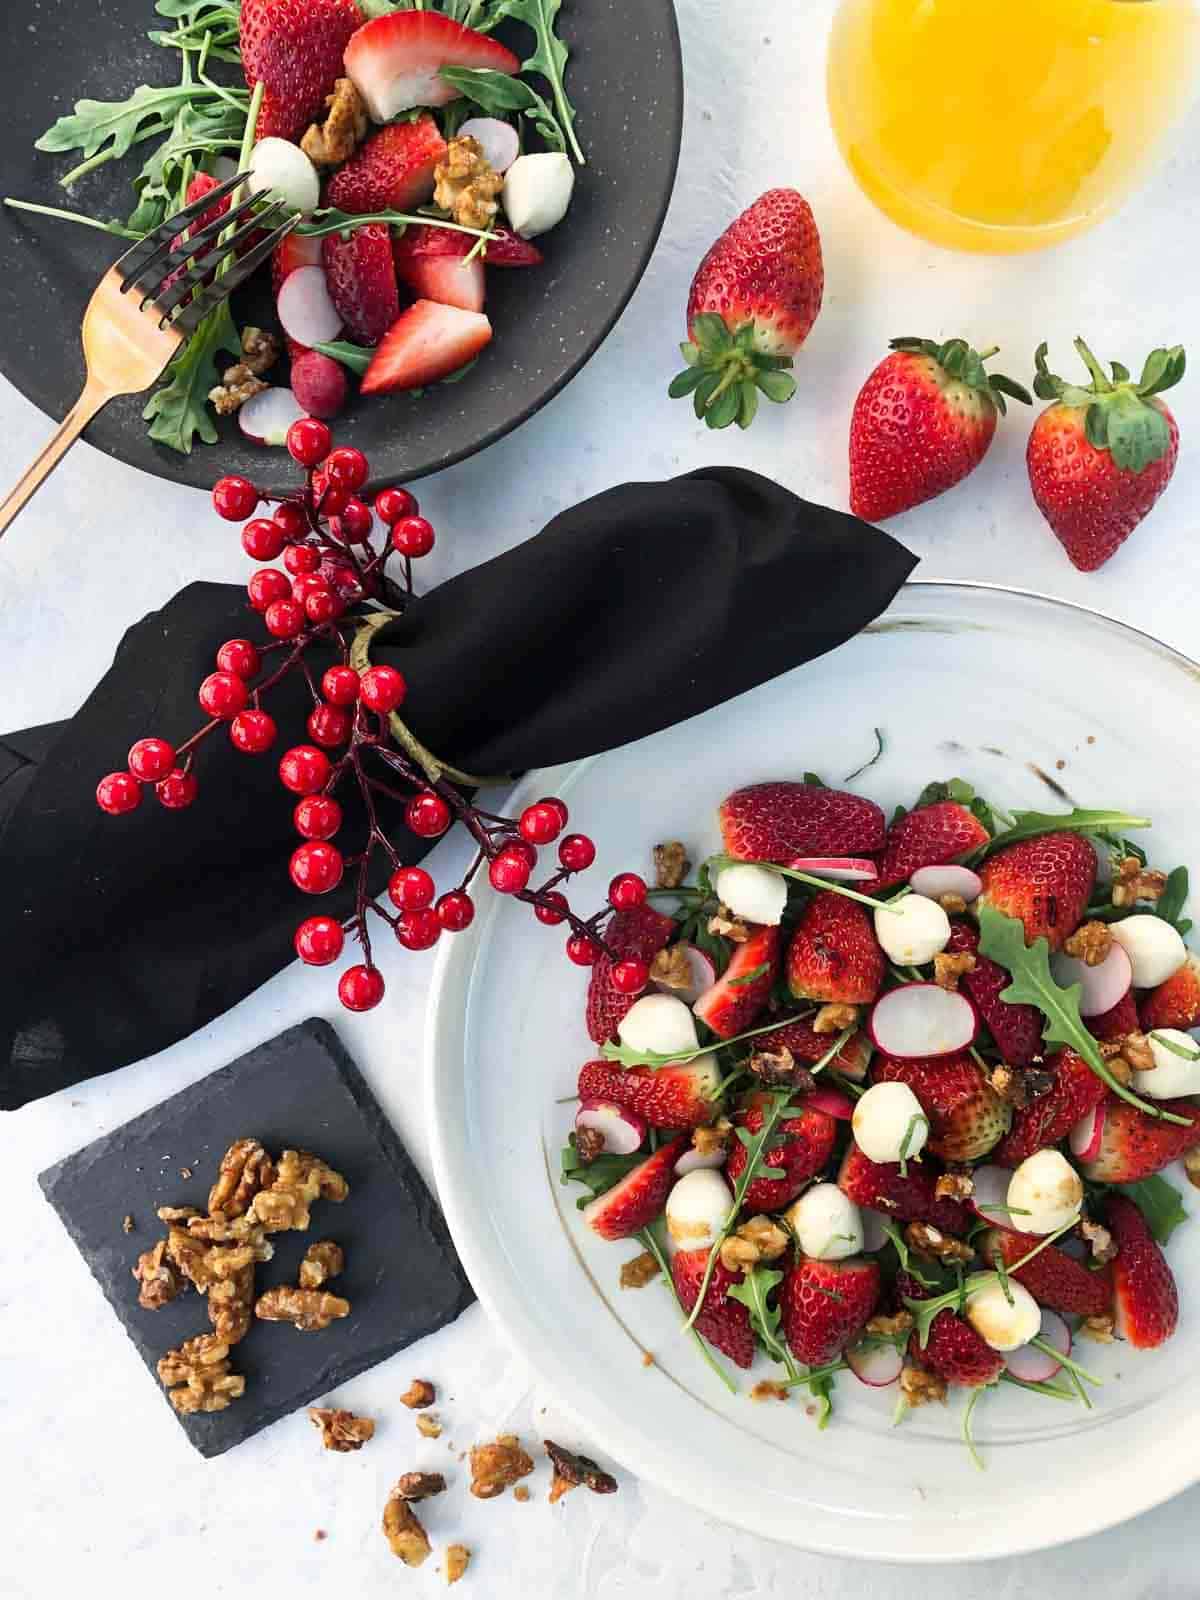 Christmas themed Summer Strawberry Salad with Bocconcini and Rocket with red berry decorations